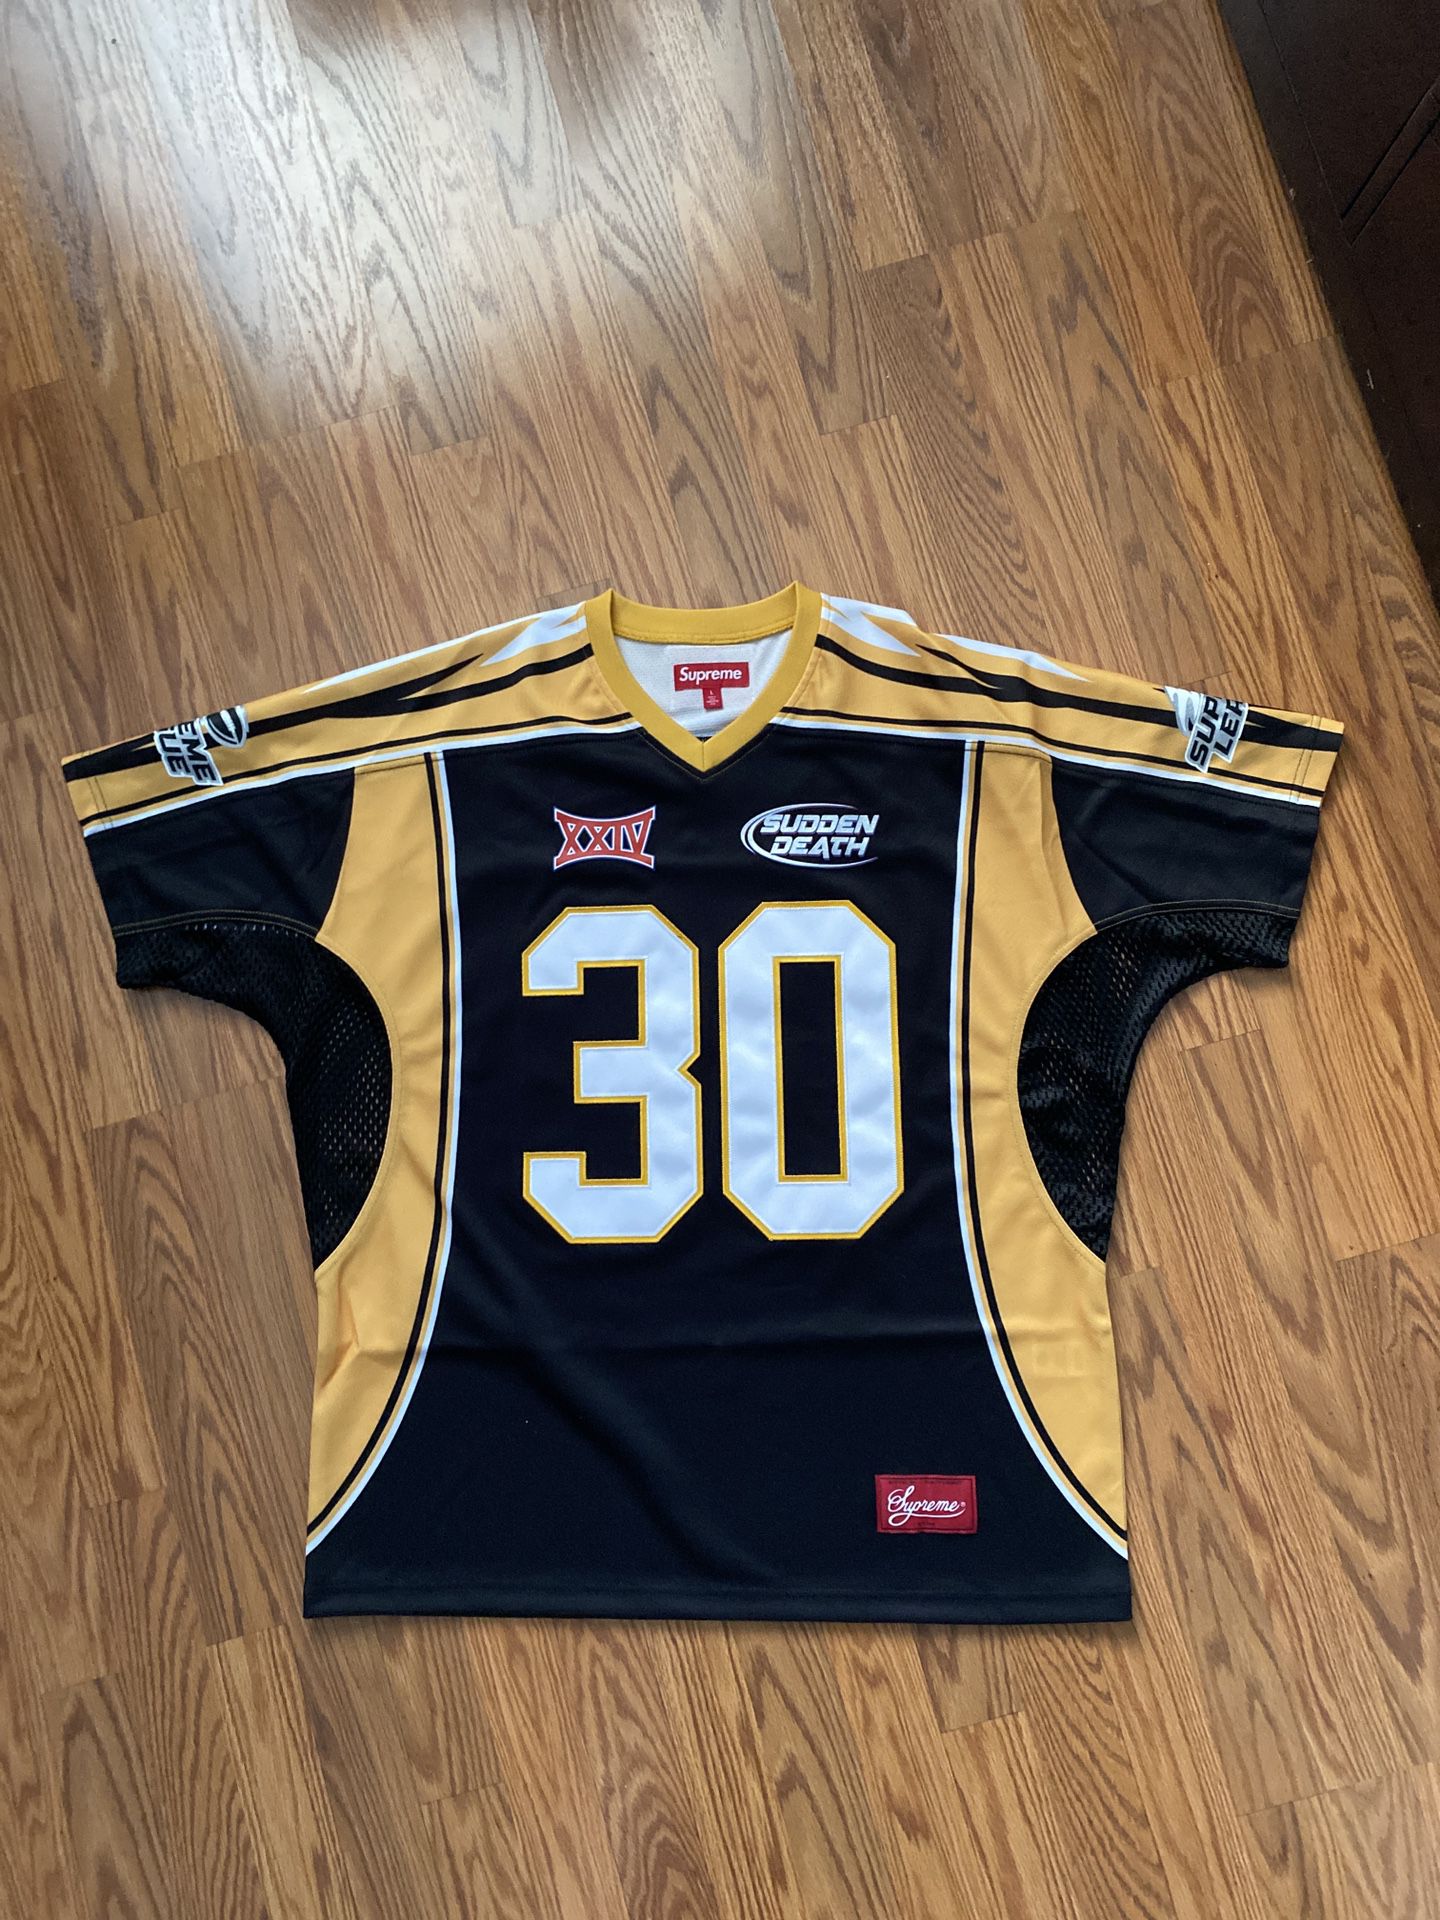 Supreme Sudden Death Football Jersey Black Size Large Brand New